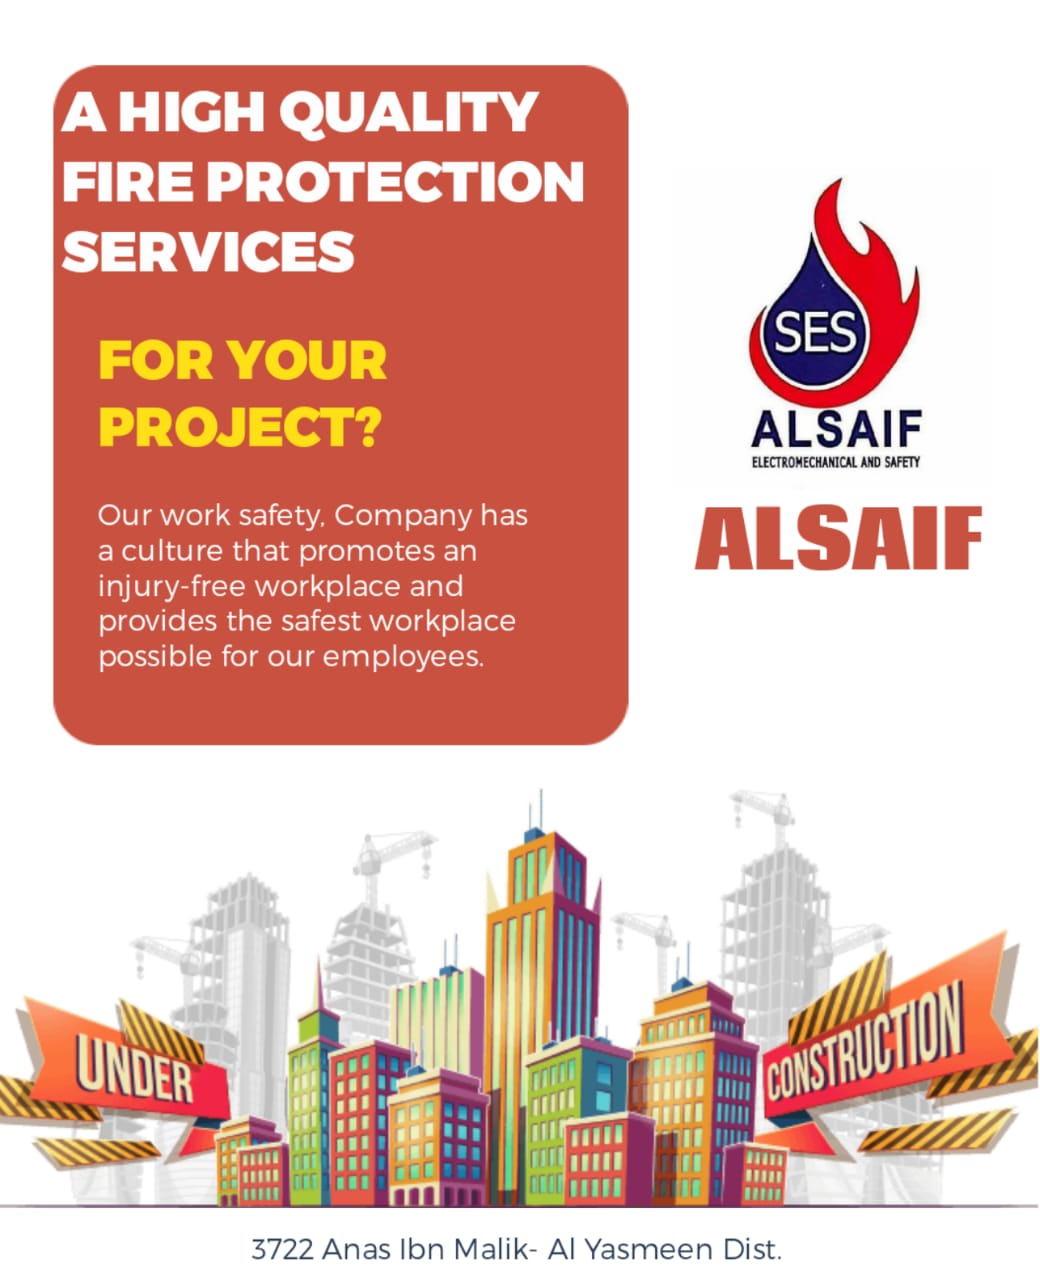 Alsaif for safety and security